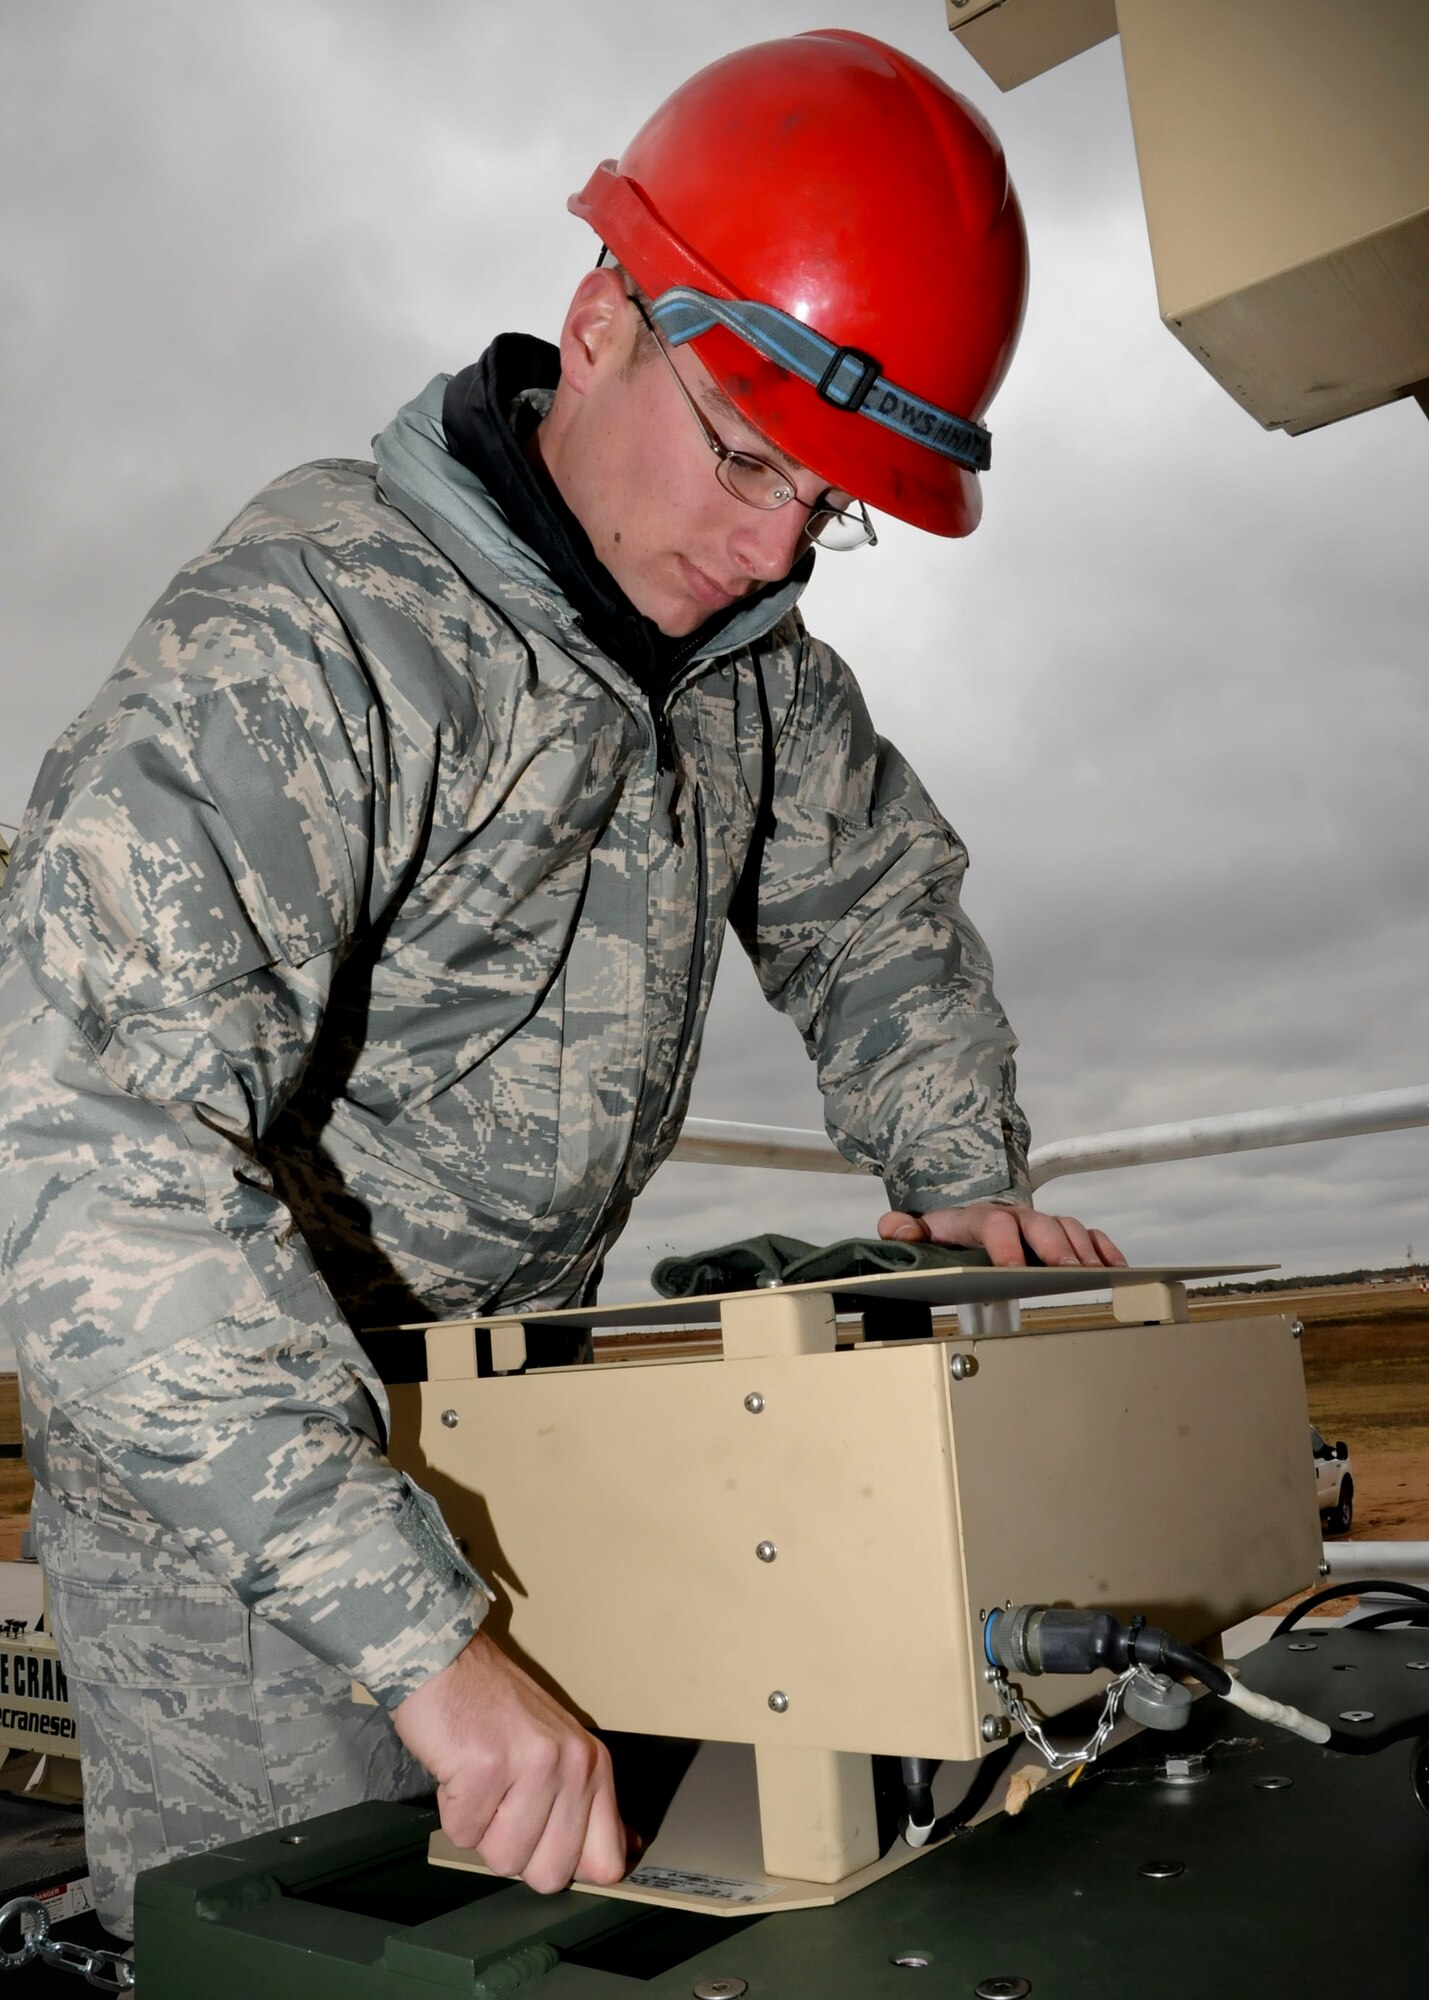 CANNON AIR FORCE BASE, N.M. -- Senior Airman Travis Wannarka, 27th Special Operations Aircraft Maintenance Squadron, tightens a bolt on a power supply for a ground data terminal antenna here, Oct. 26. The power supply given off to the GDT is roughly 110 volts and has a backup of a 24 volt battery. (U.S. Air Force photo/ Senior Airman Erik Cardenas)